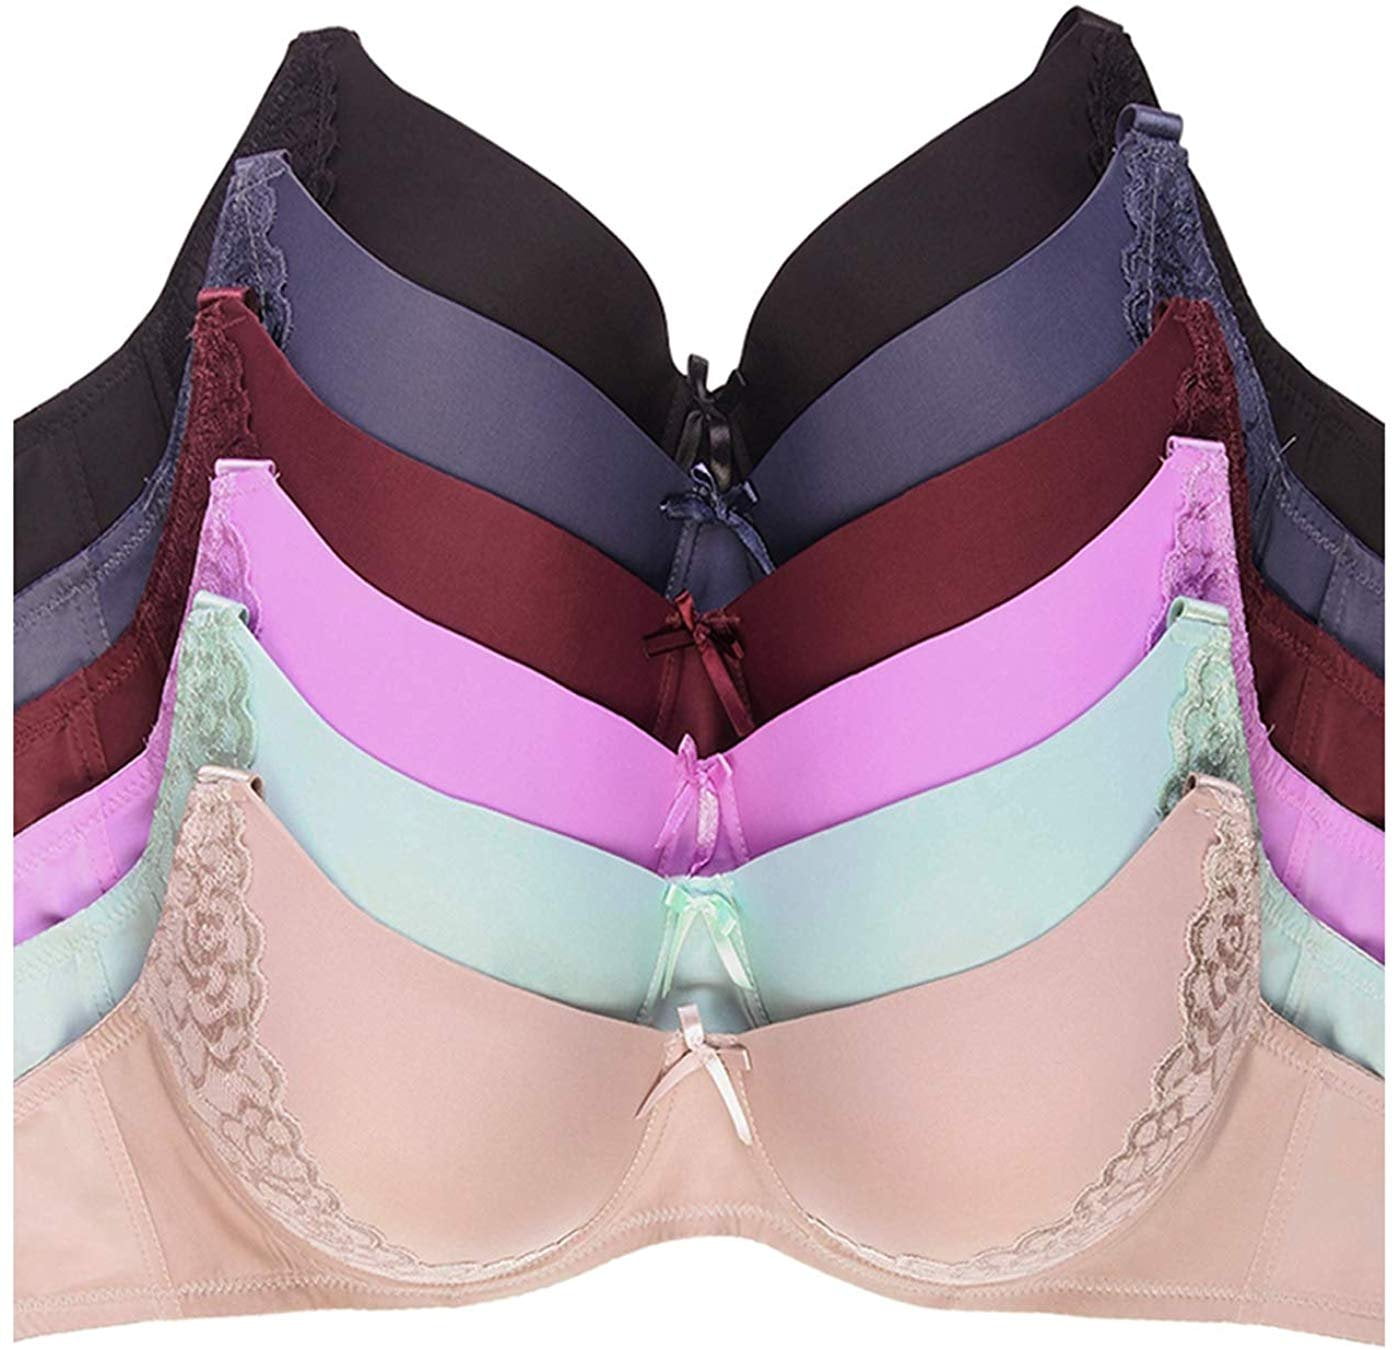 Mamia & Sofra IN-BR4358LD-36D D Cup Full Coverage Bra - Size 36 - Pack of 6